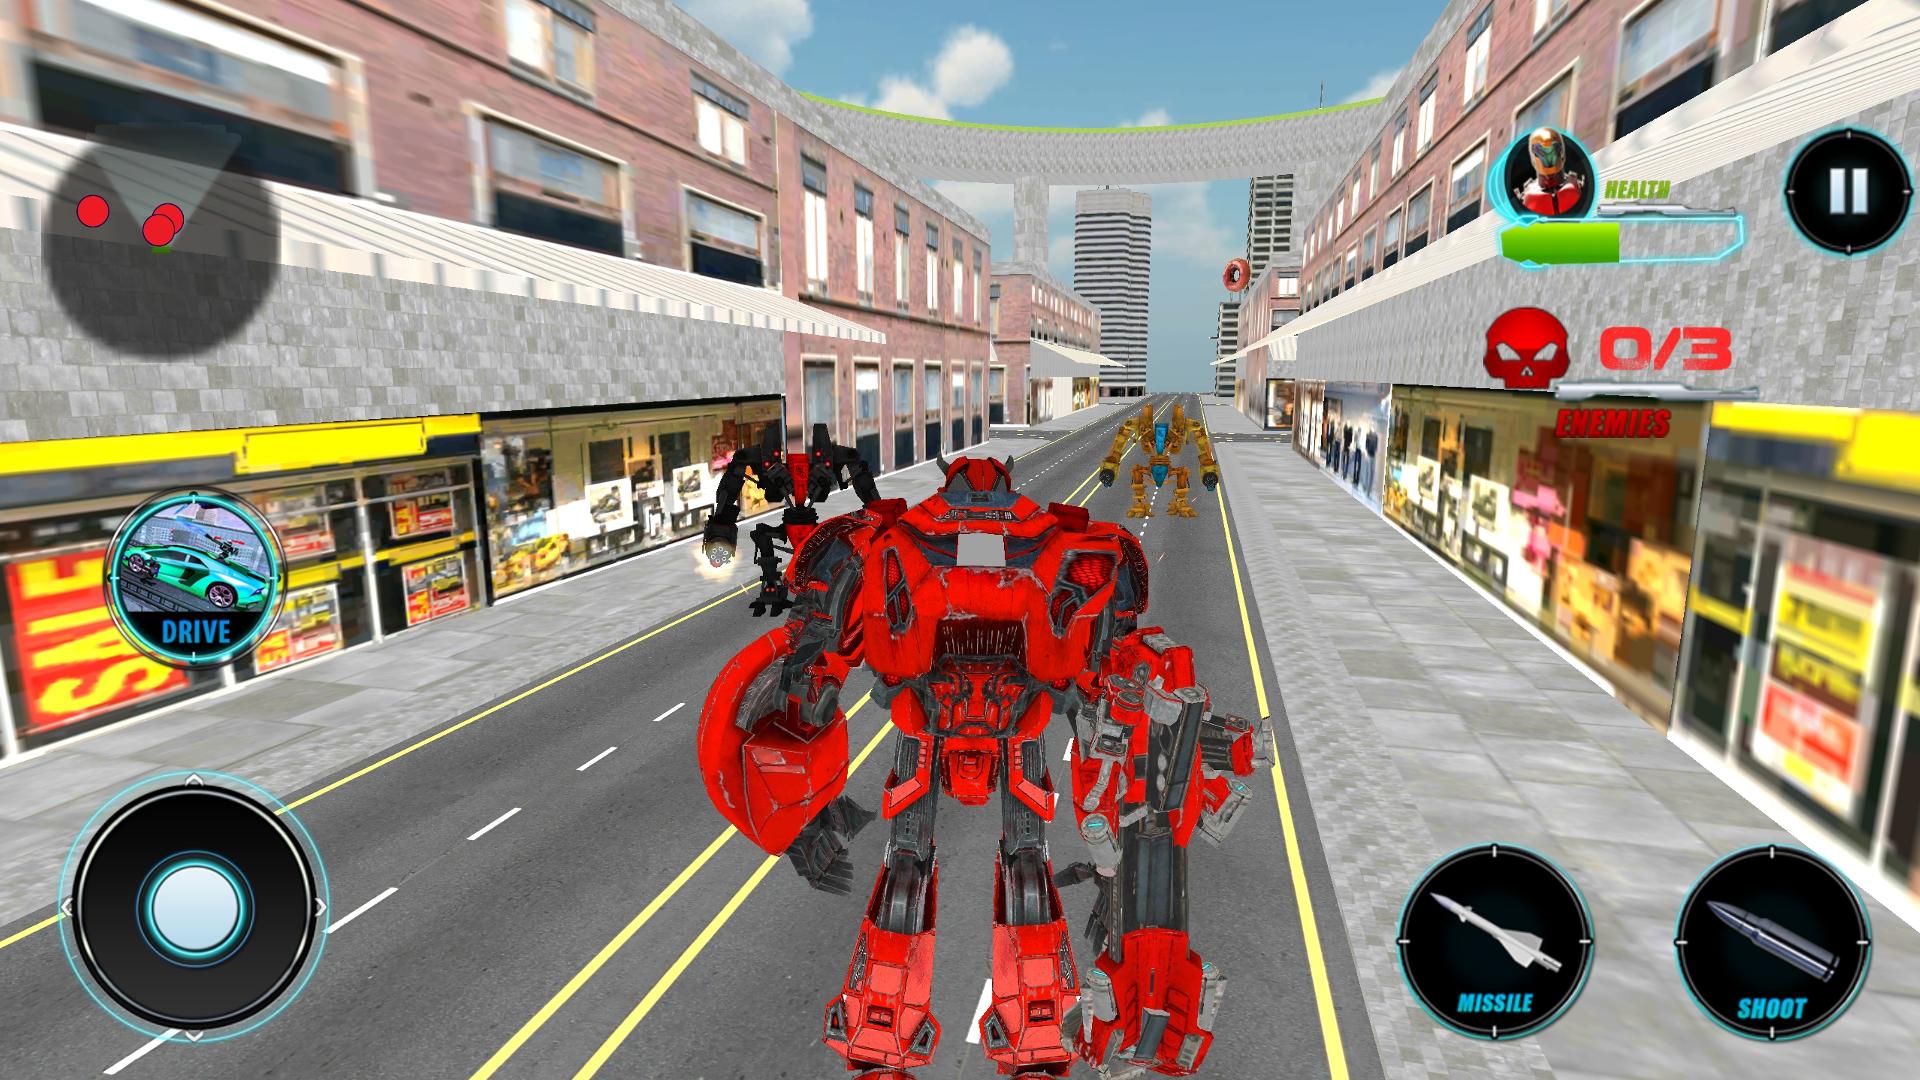 Picasso glide Torrent Air Police Robot Cop Car Flying Car Robot Games APK for Android Download